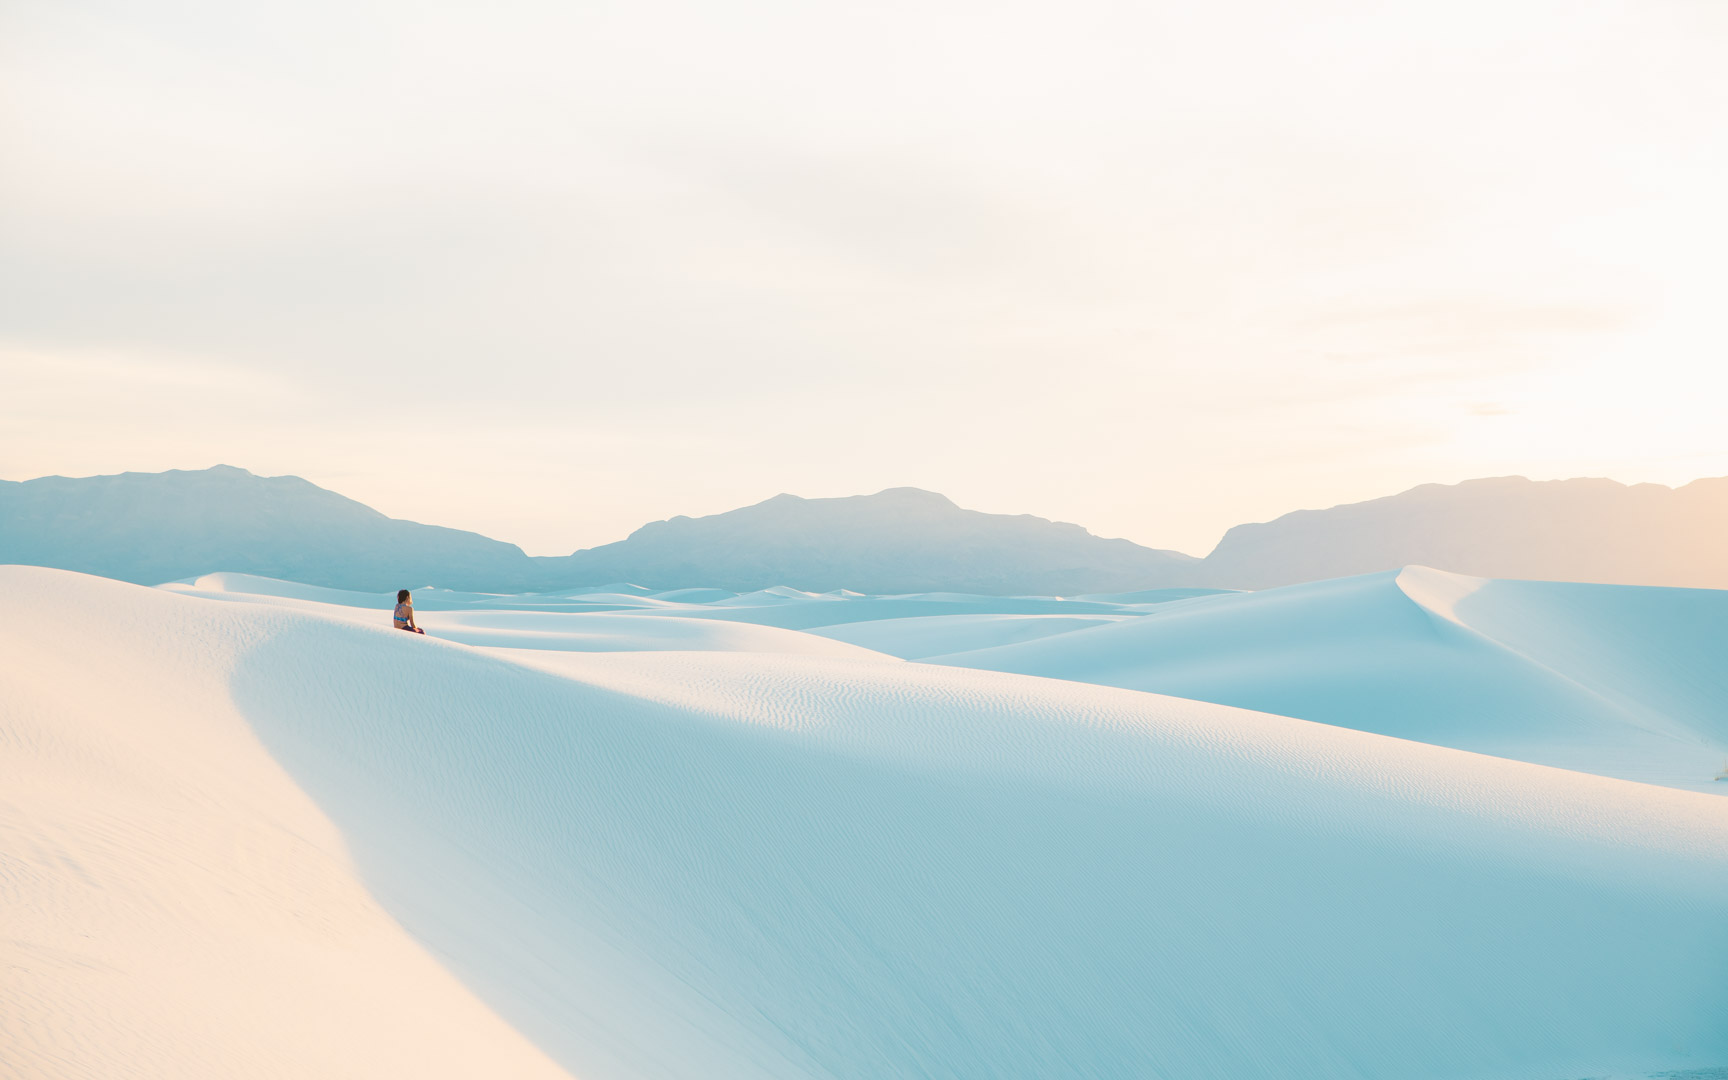 Things To Do In White Sands NM For Photographers